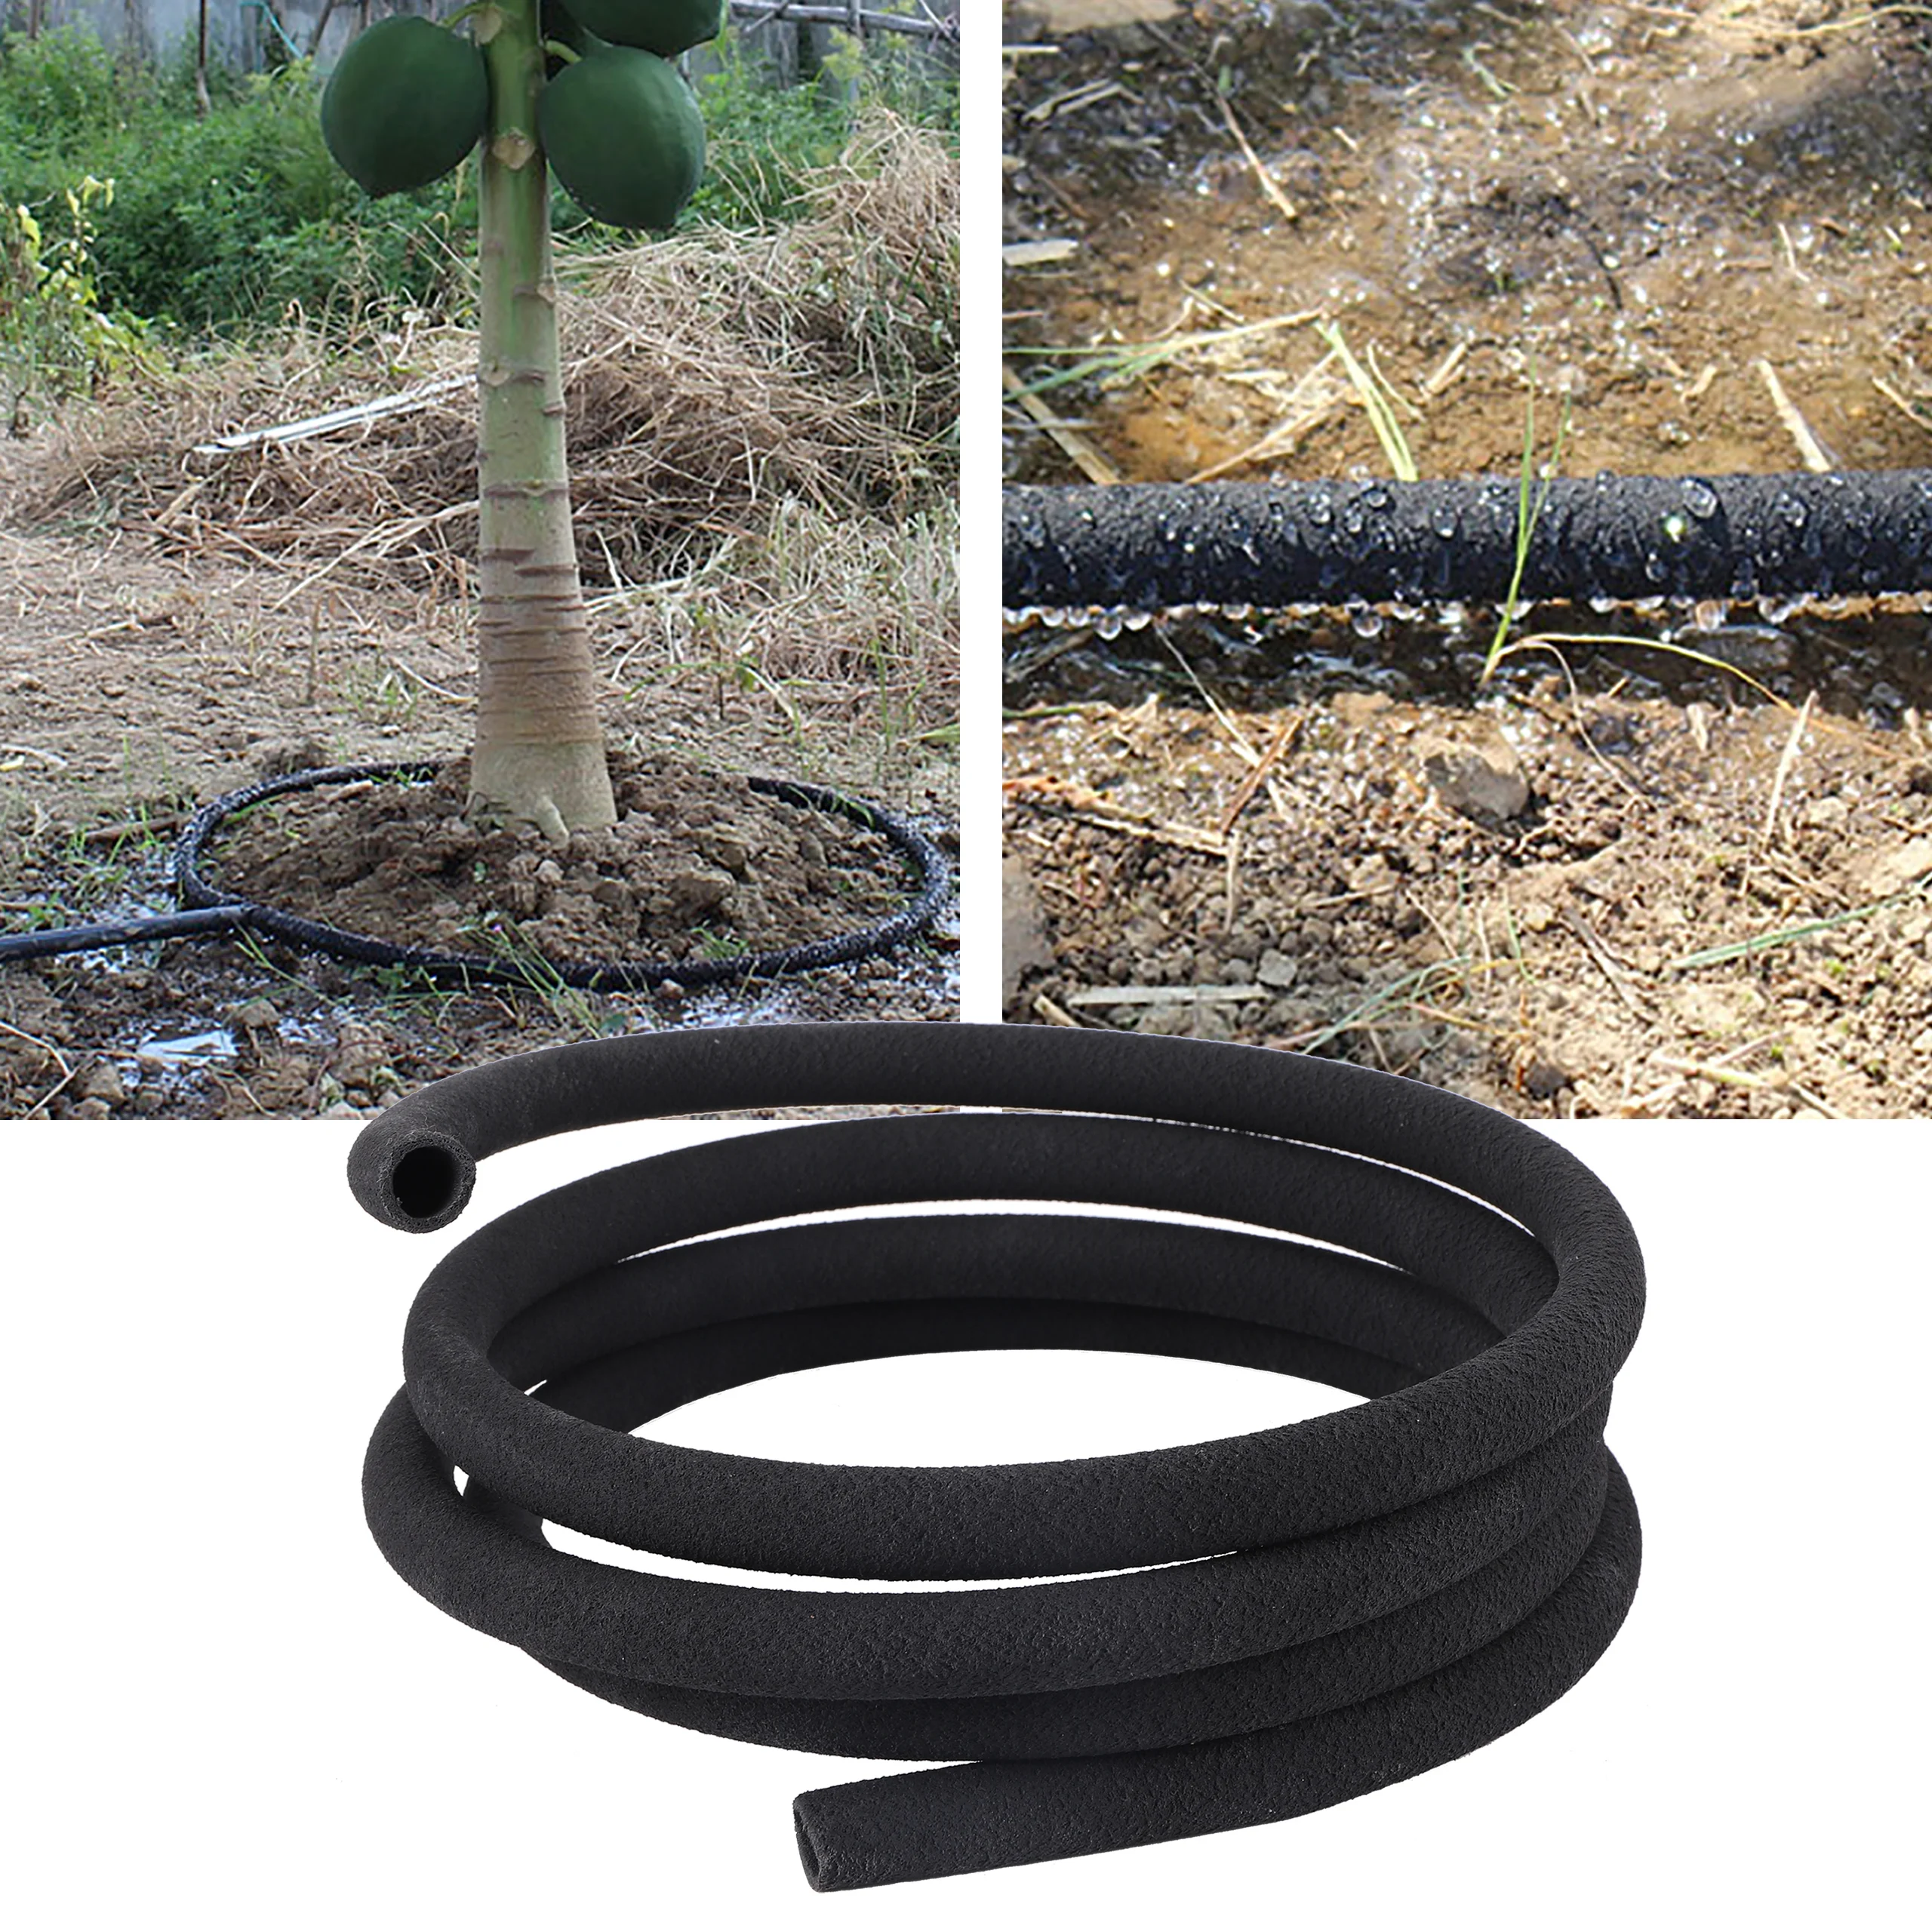 15m /// SOAKER HOSE Leaky Pipe Garden Irrigation System POROUS PIPE__SPECIAL SET 